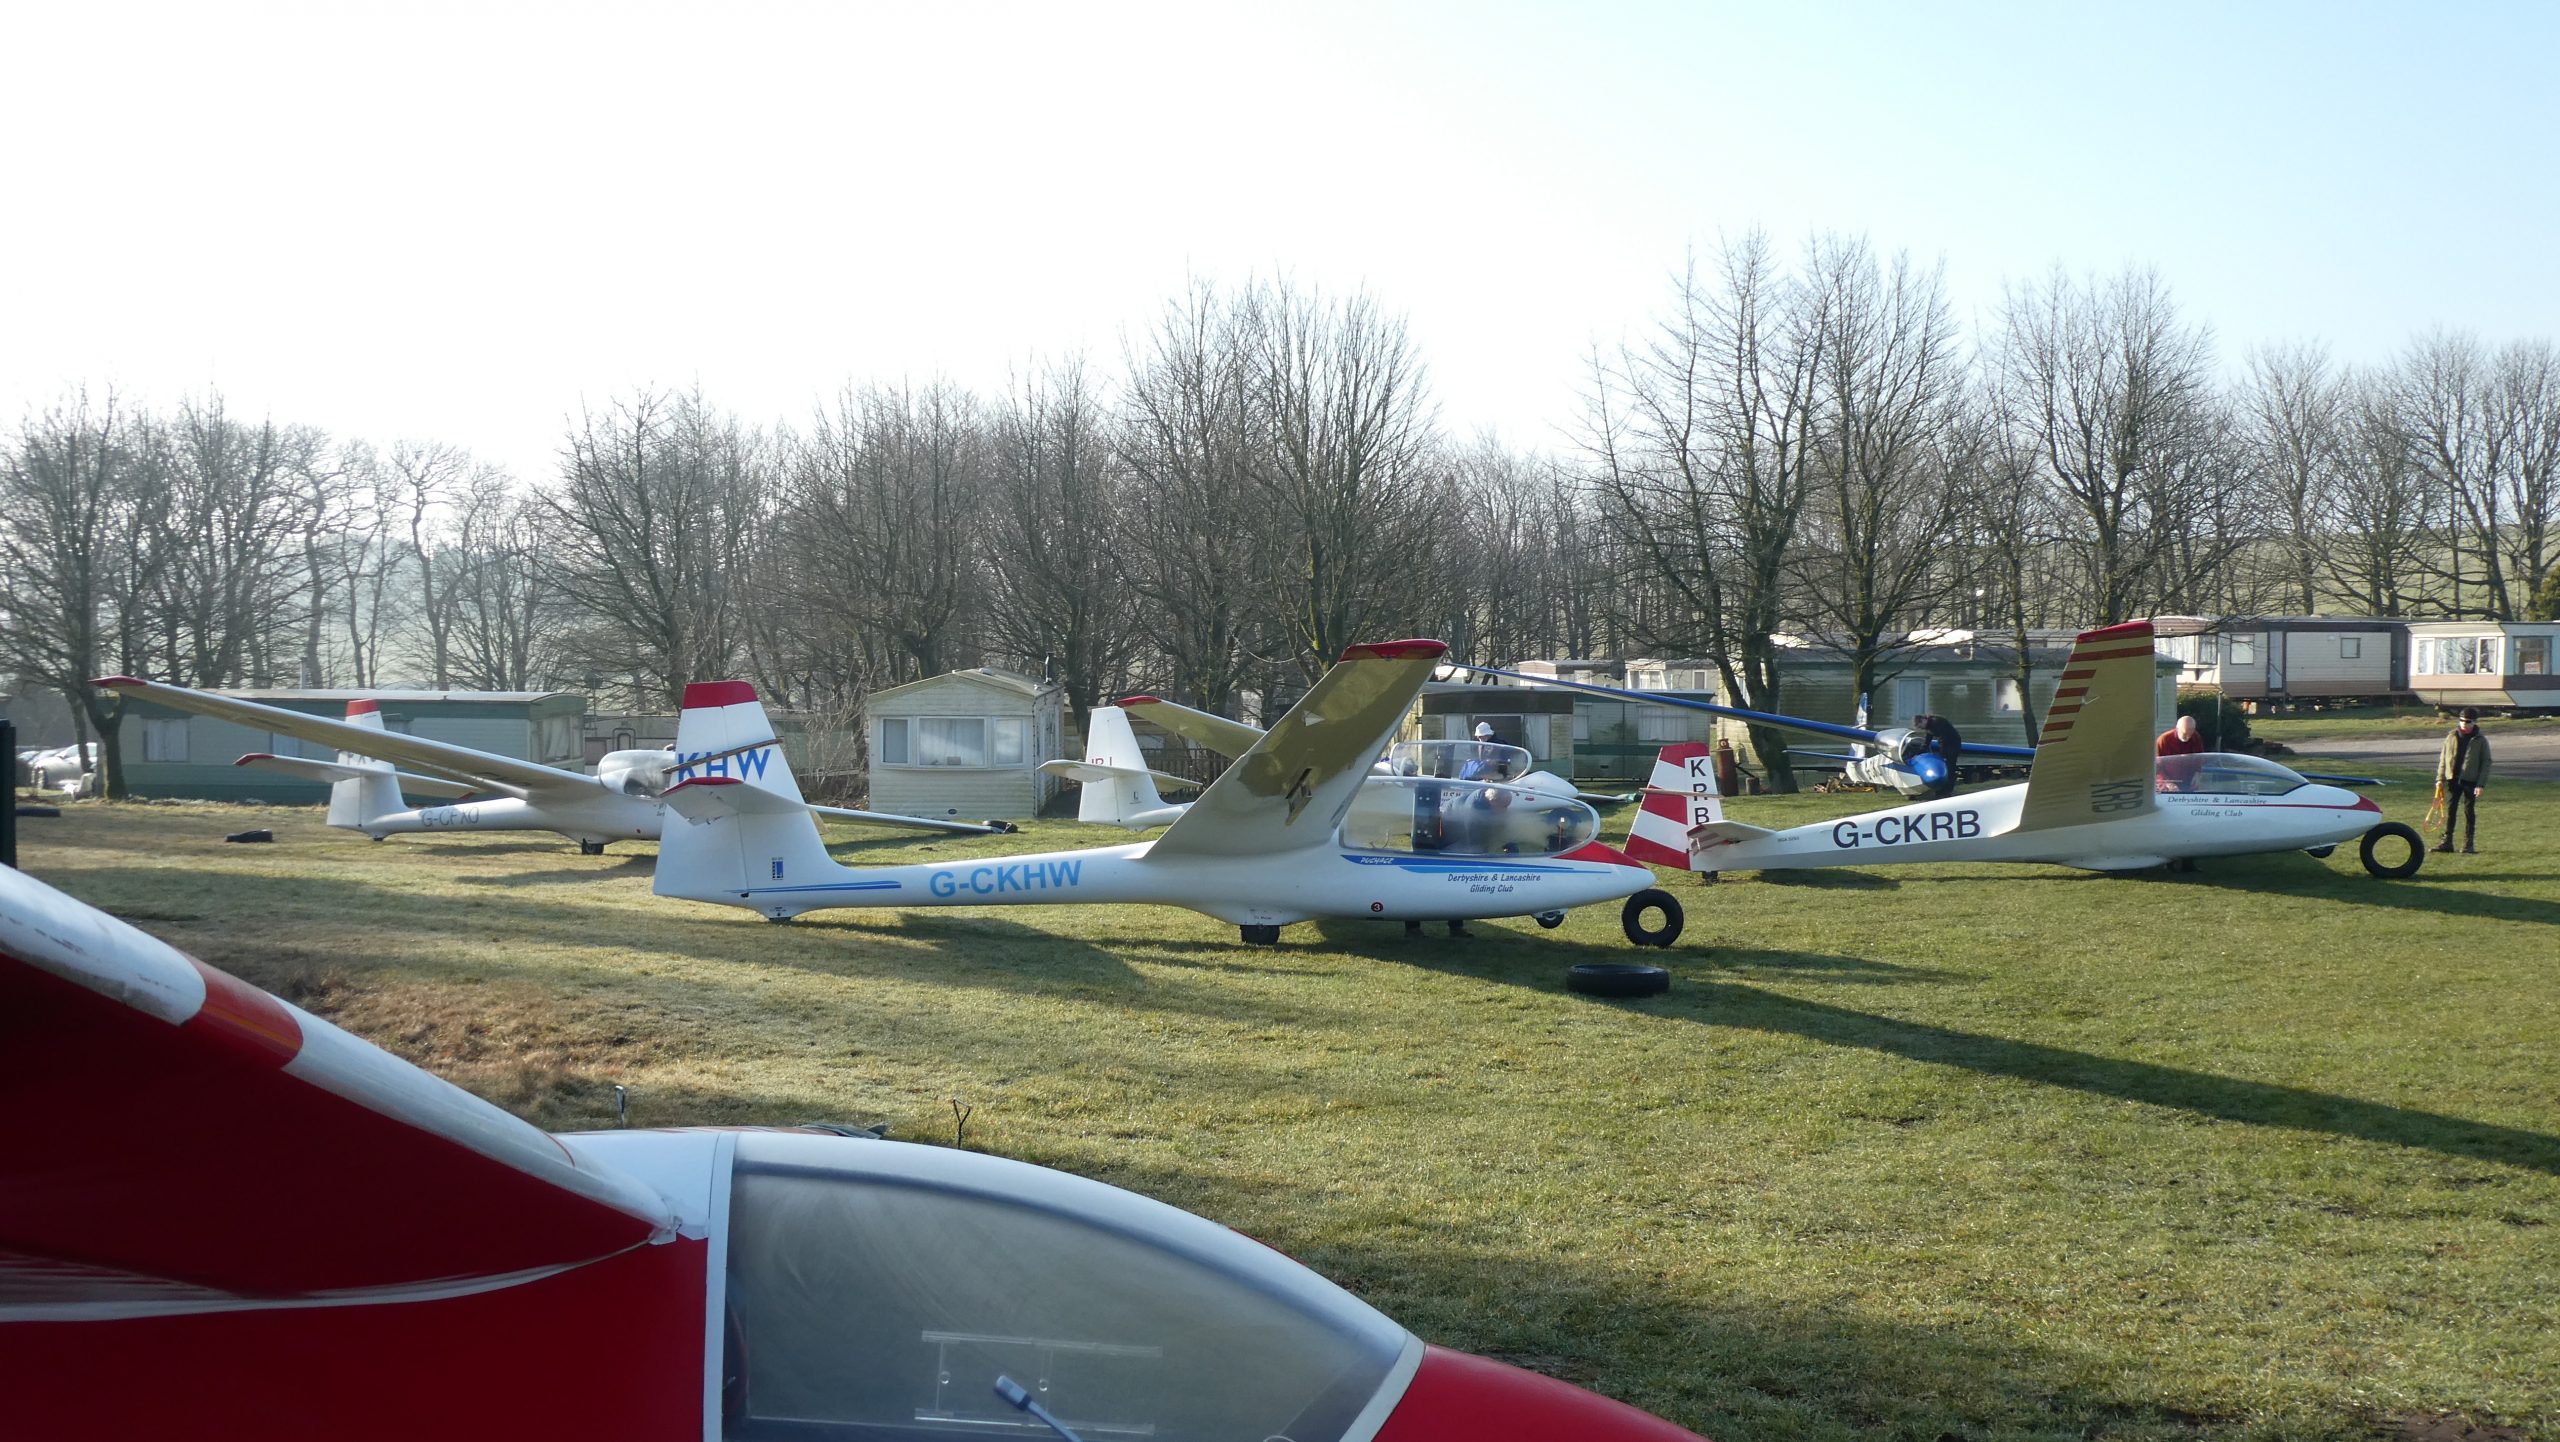 DLGC's fleet of two-seat training gliders being prepared for the day's flying